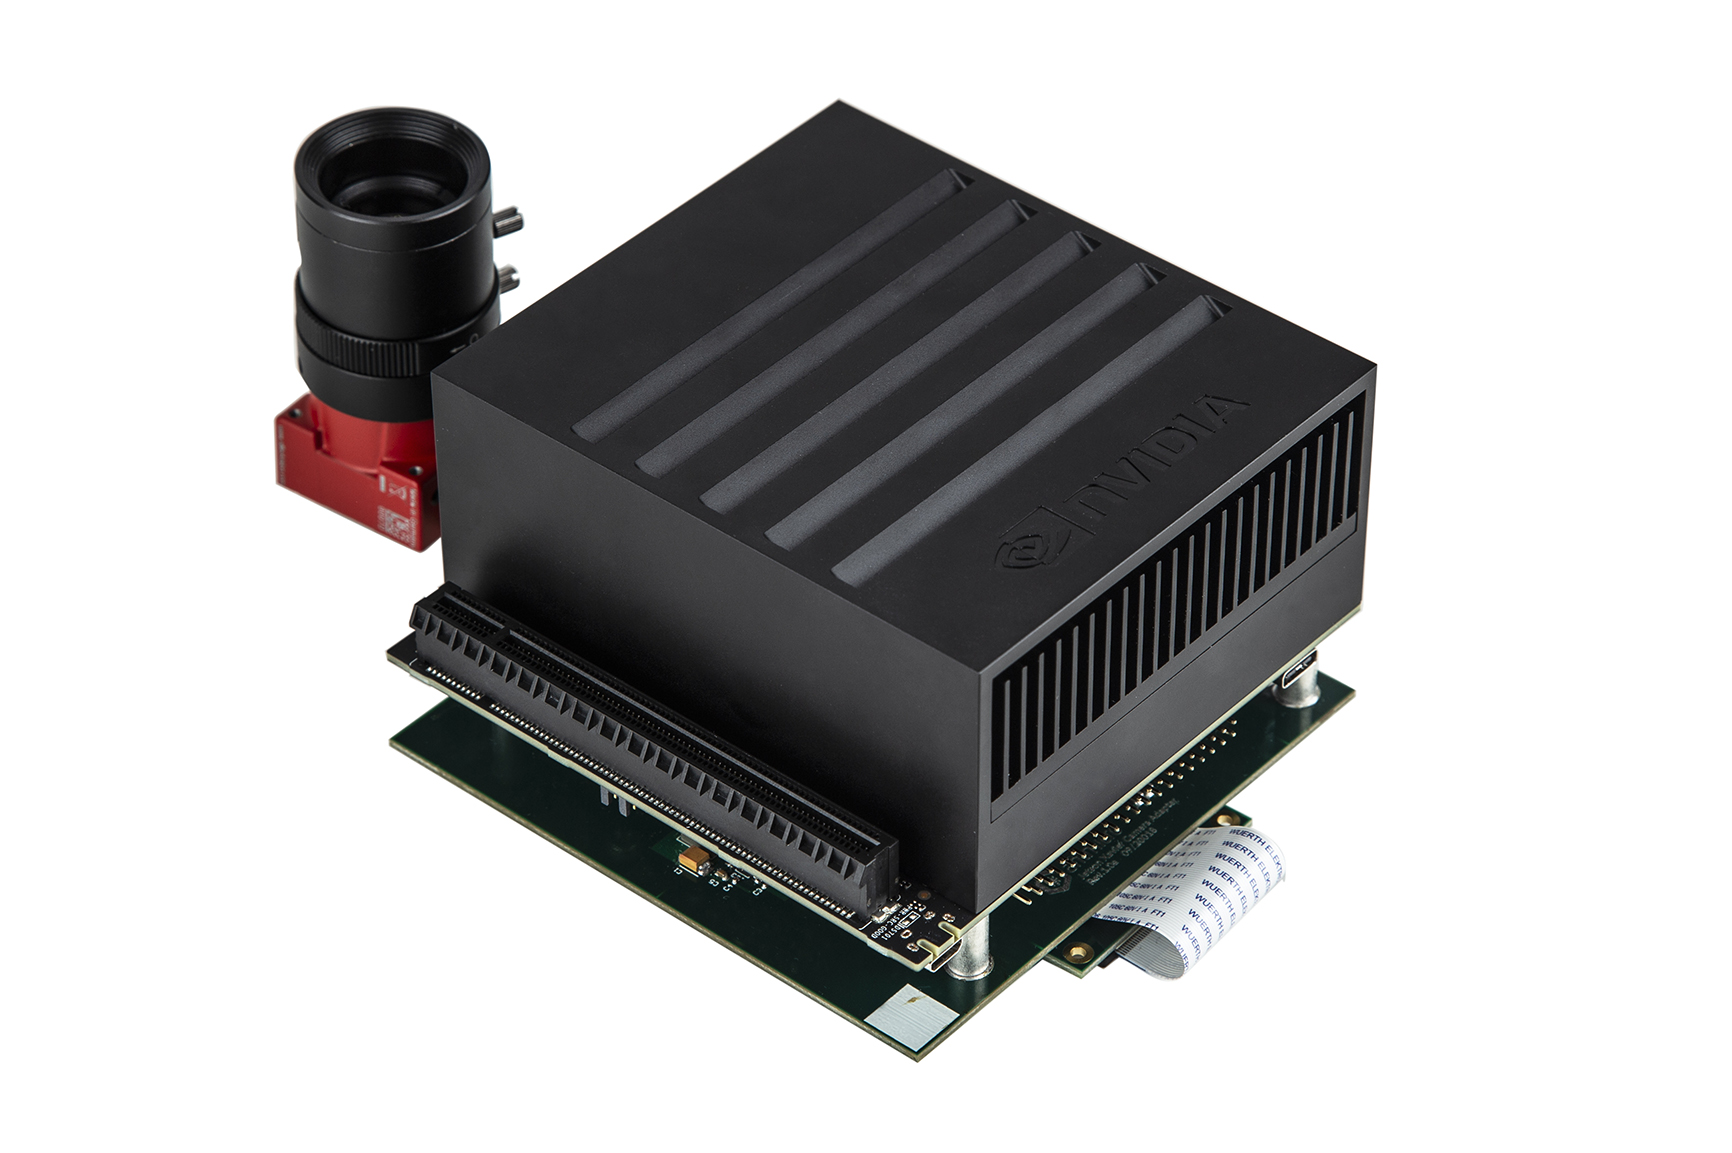 Nvidia Jetson Xavier on Antmicro's baseboard with Allied Vision's Alvium camera